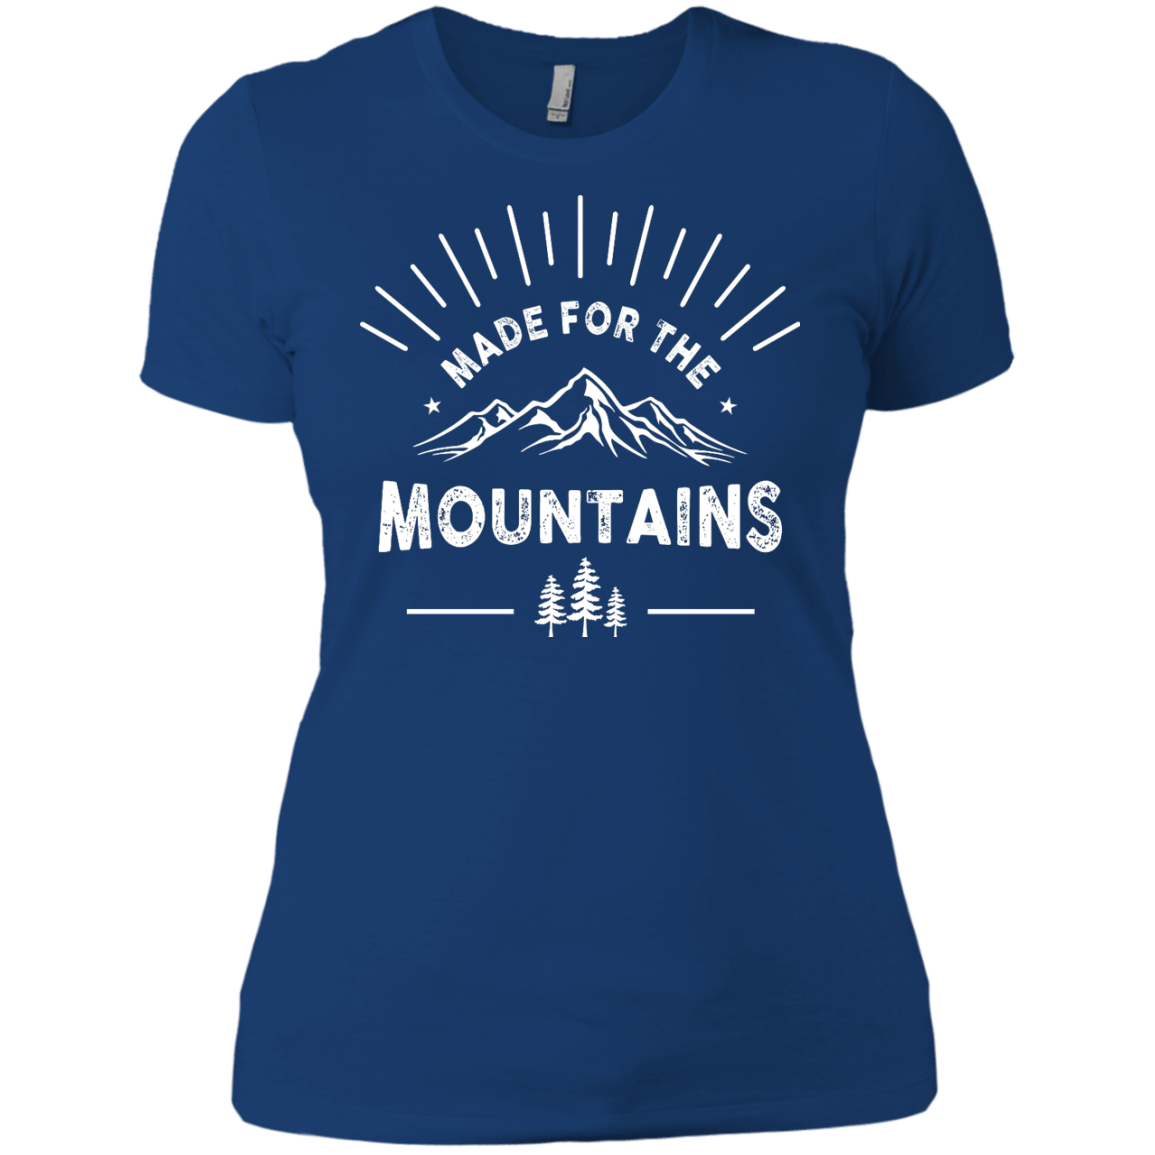 Made For The Mountains Ladies Tees - Powderaddicts